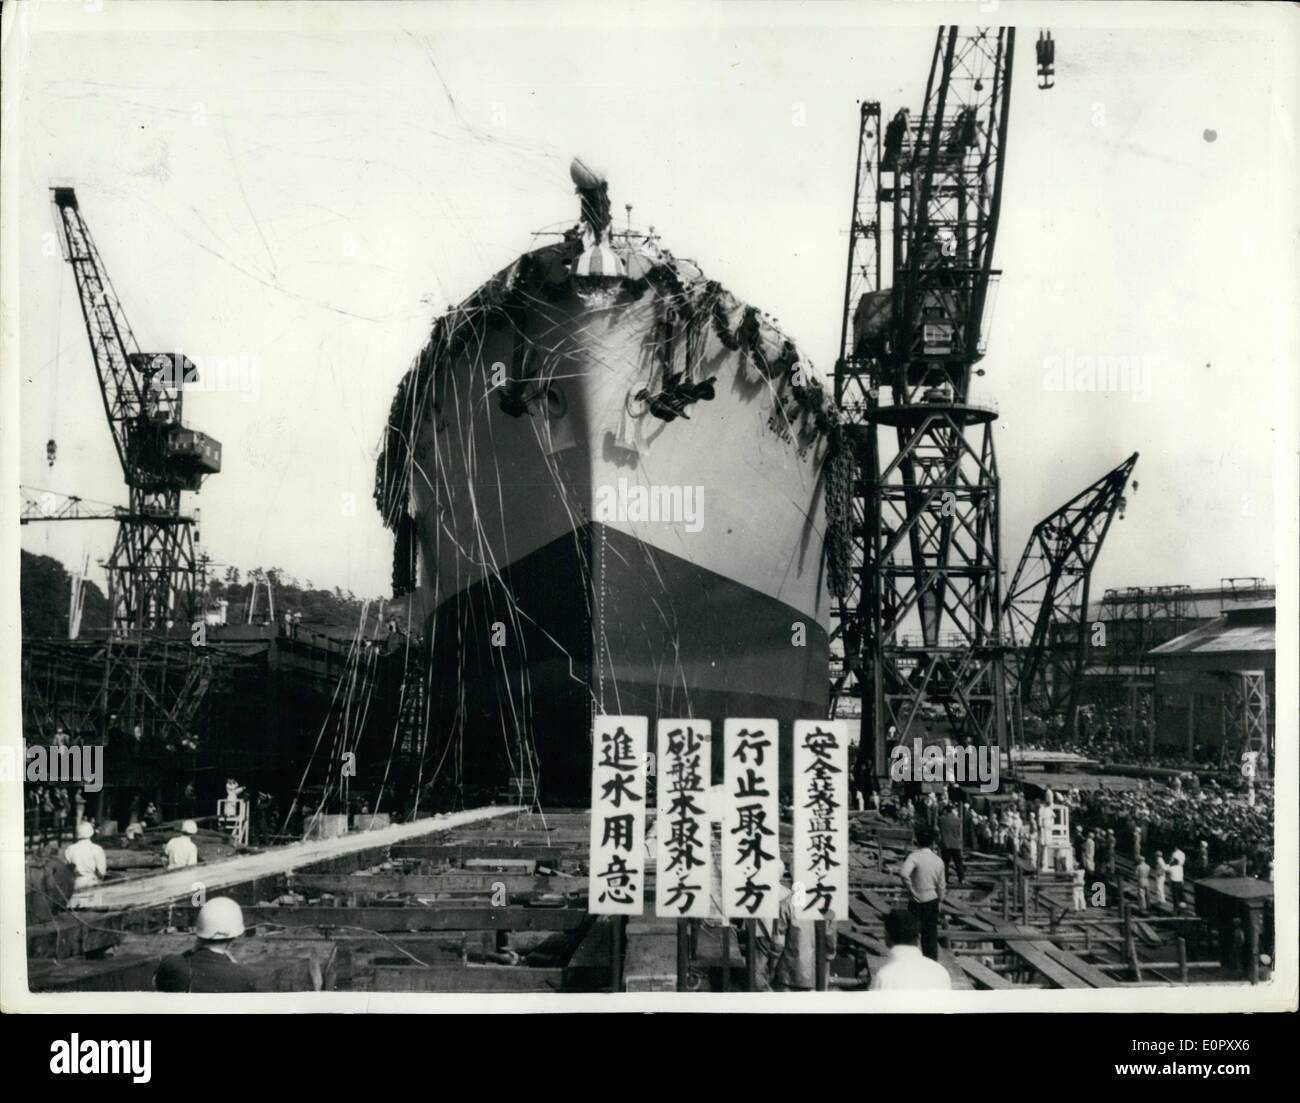 Jun. 06, 1957 - NewJapanese tanker enters the water.. 21,100 vessel launched at Yokosuka. The 21,100 ton Japanese built tanker ''Fujikawa Maru'' enters the water at the Uraga Dookyard, Yokosuka former base of the Imperial Japanese navy during her recent launching .. The ceremony was carrie out by a schoolgirl Akiko Makazana daughter of Rokuro Nakazawa, managing director of the Kawasaki Steamship company for whom the tanker was built. Stock Photo